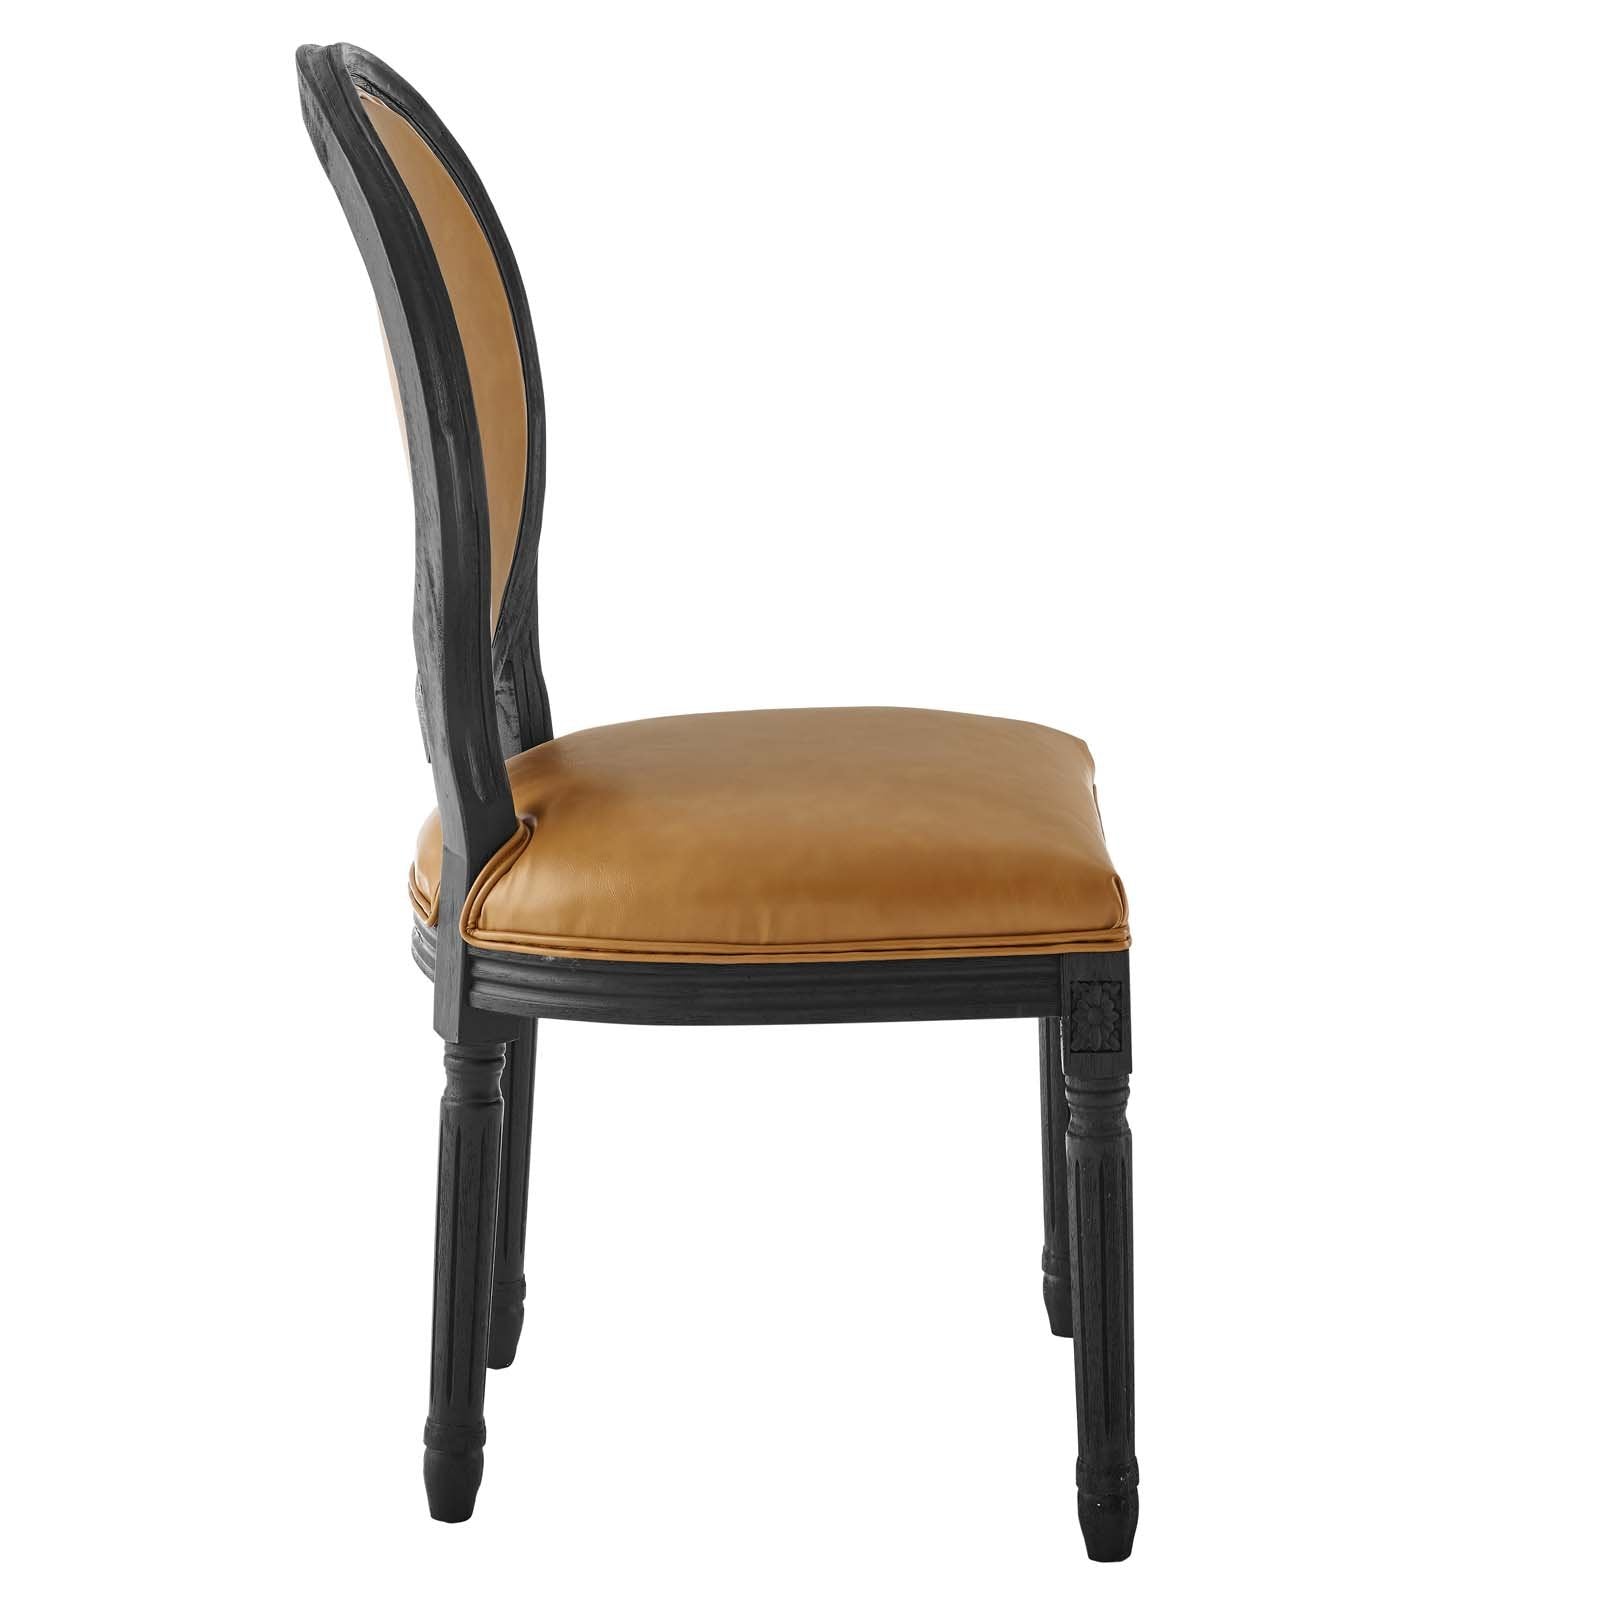 Emanate Vintage French Vegan Leather Dining Side Chair - East Shore Modern Home Furnishings